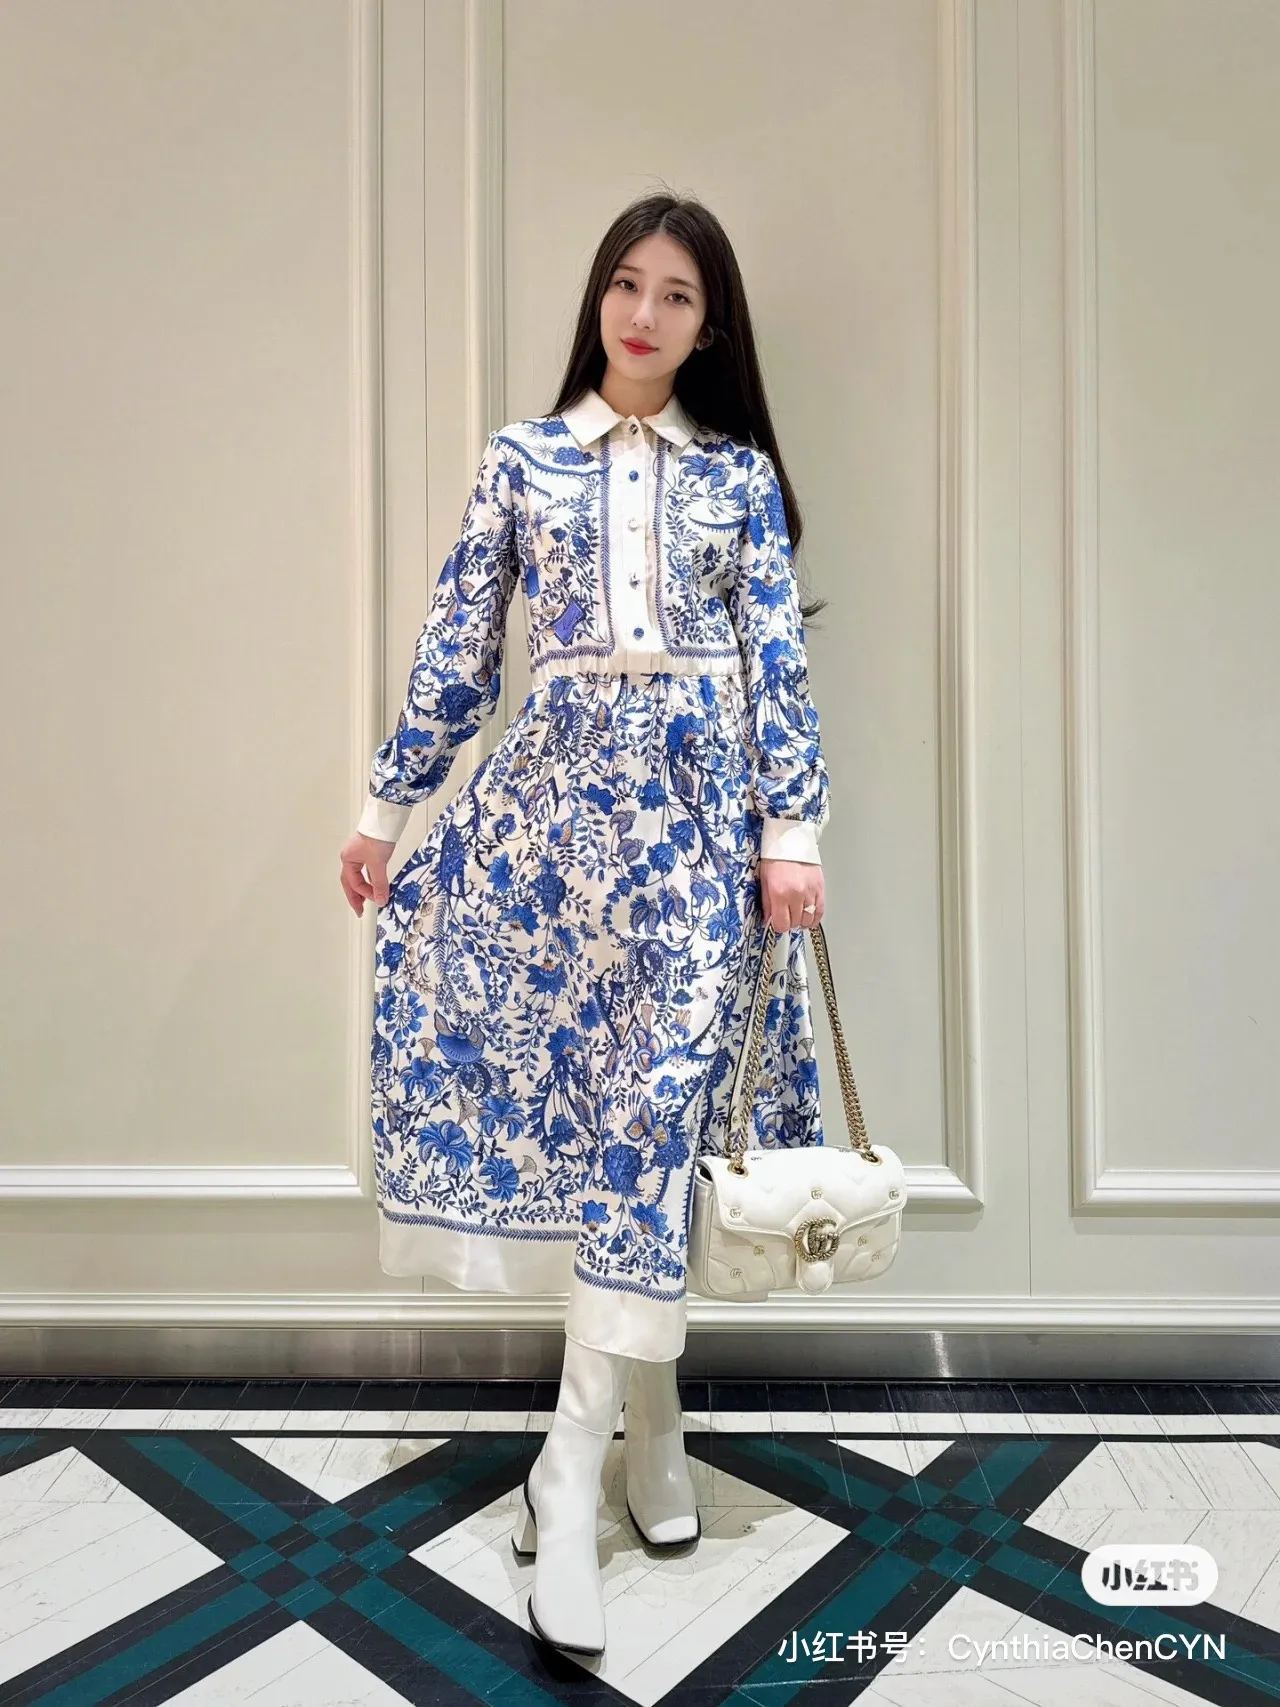 Vintage sky blue floral pattern with blue and white porcelain style dragon dress women's fashion casual designer letter print girls loose pleated skirt